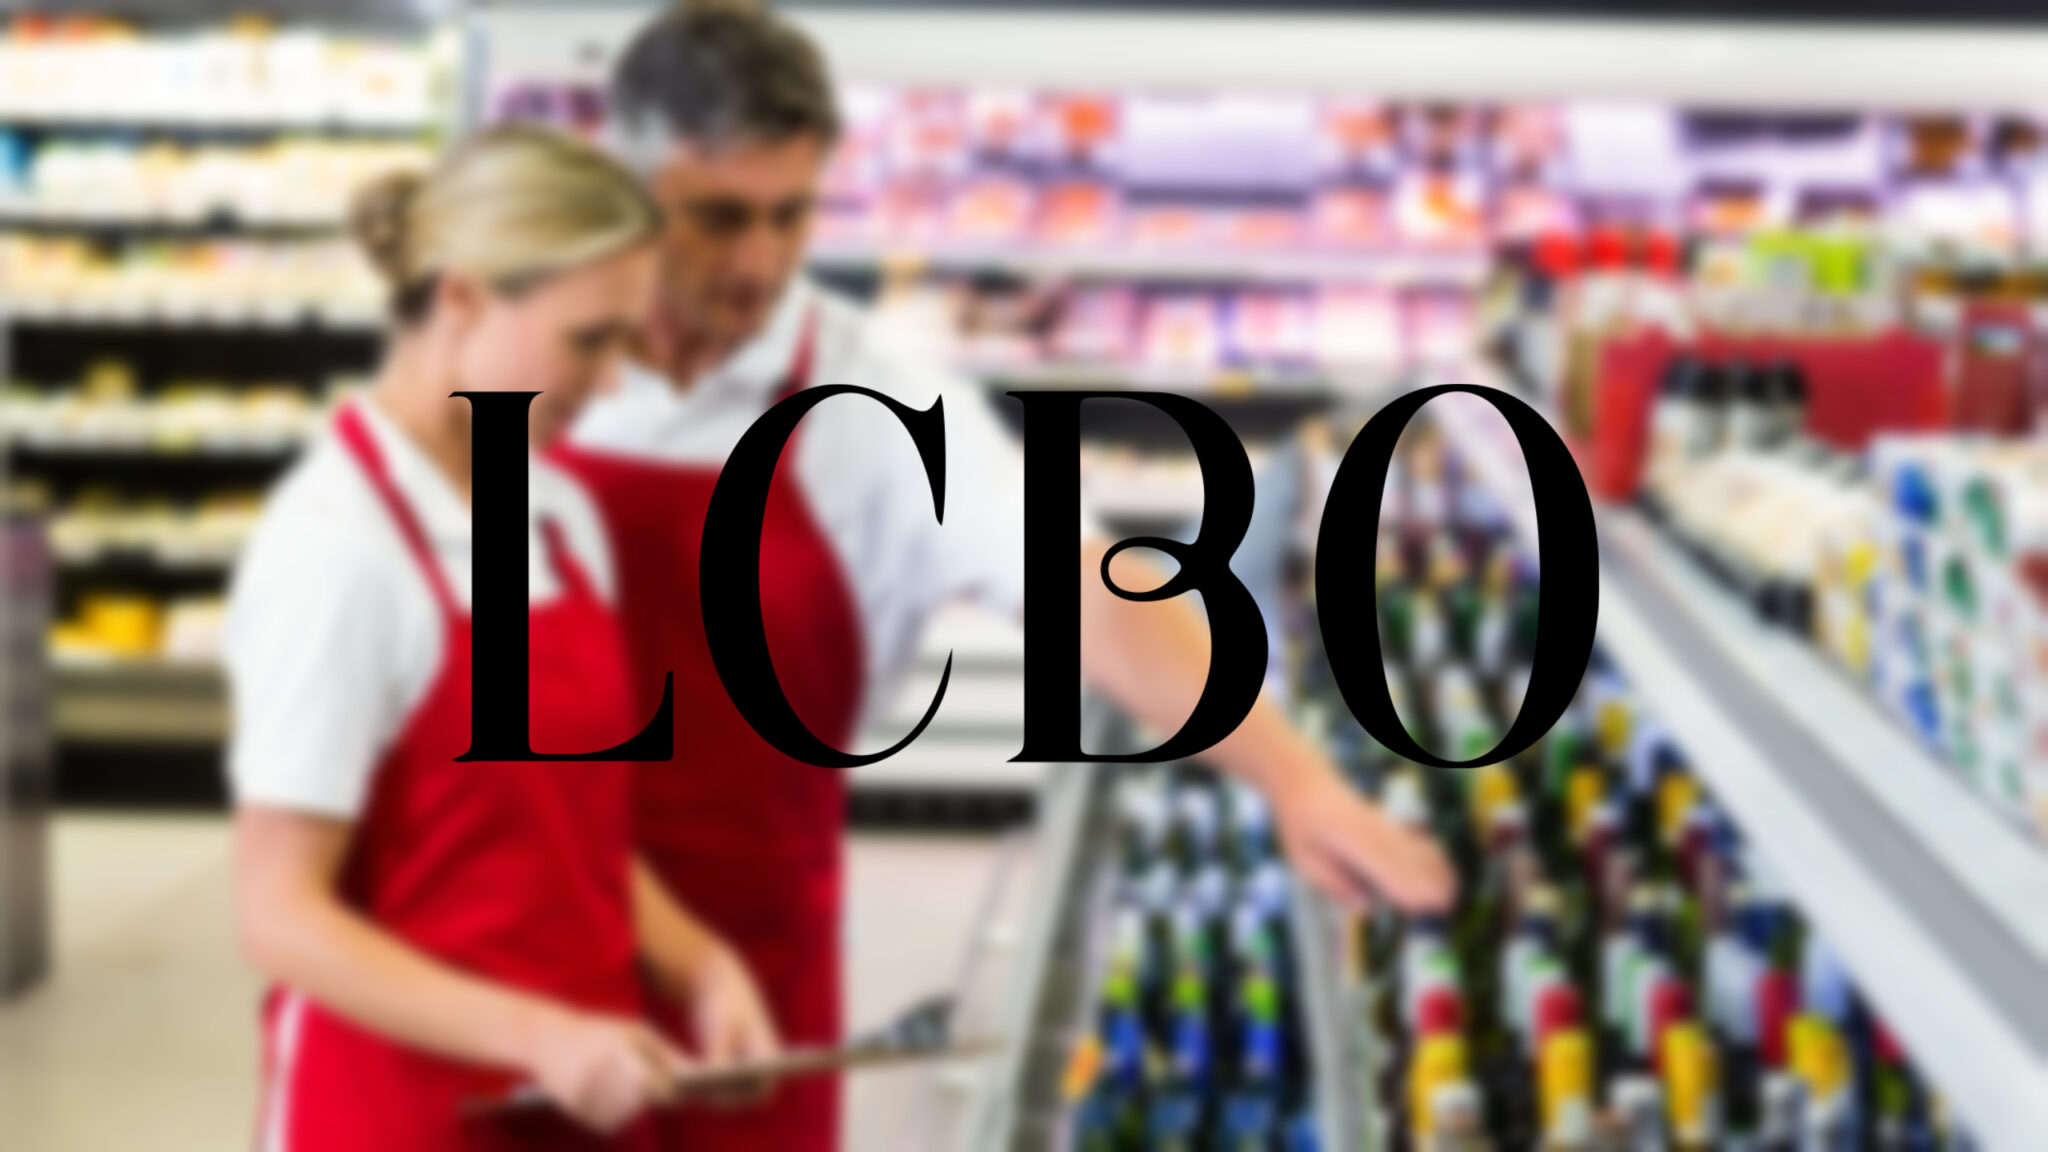 LCBO cybersecurity incident